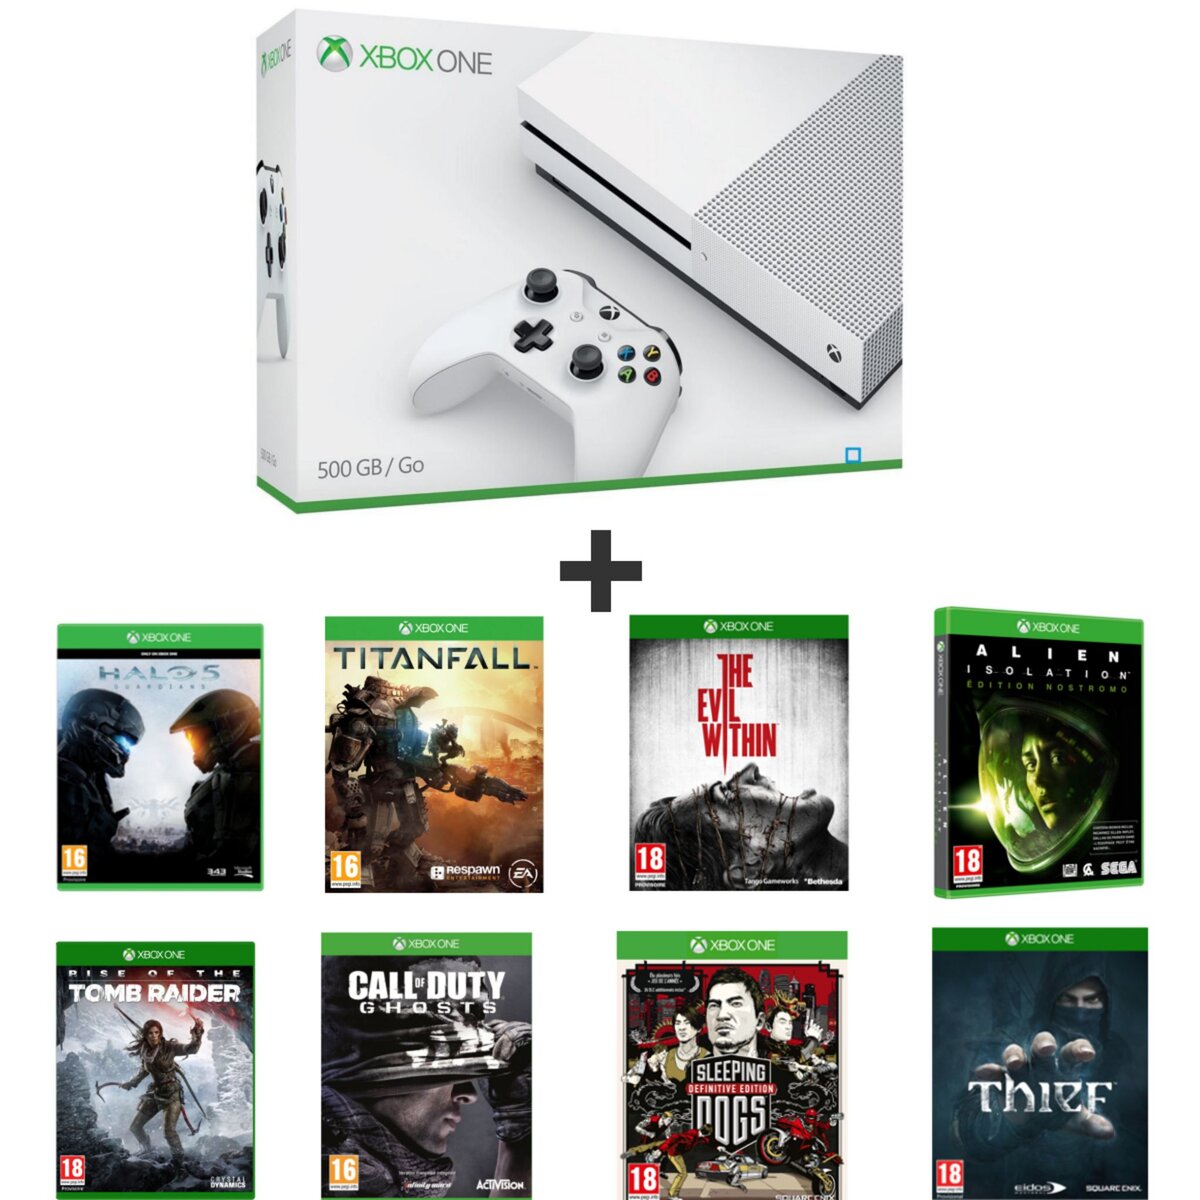 Console Xbox One S 500 Go + TITANFALL + THE EVIL WITHIN + ALIEN ISOLATION - LIMITED EDITION + CALL OF DUTY GHOSTS + SLEEPING DOGS + THIEF + HALO 5 GUARDIANS + RISE OF THE TOMB RAIDER